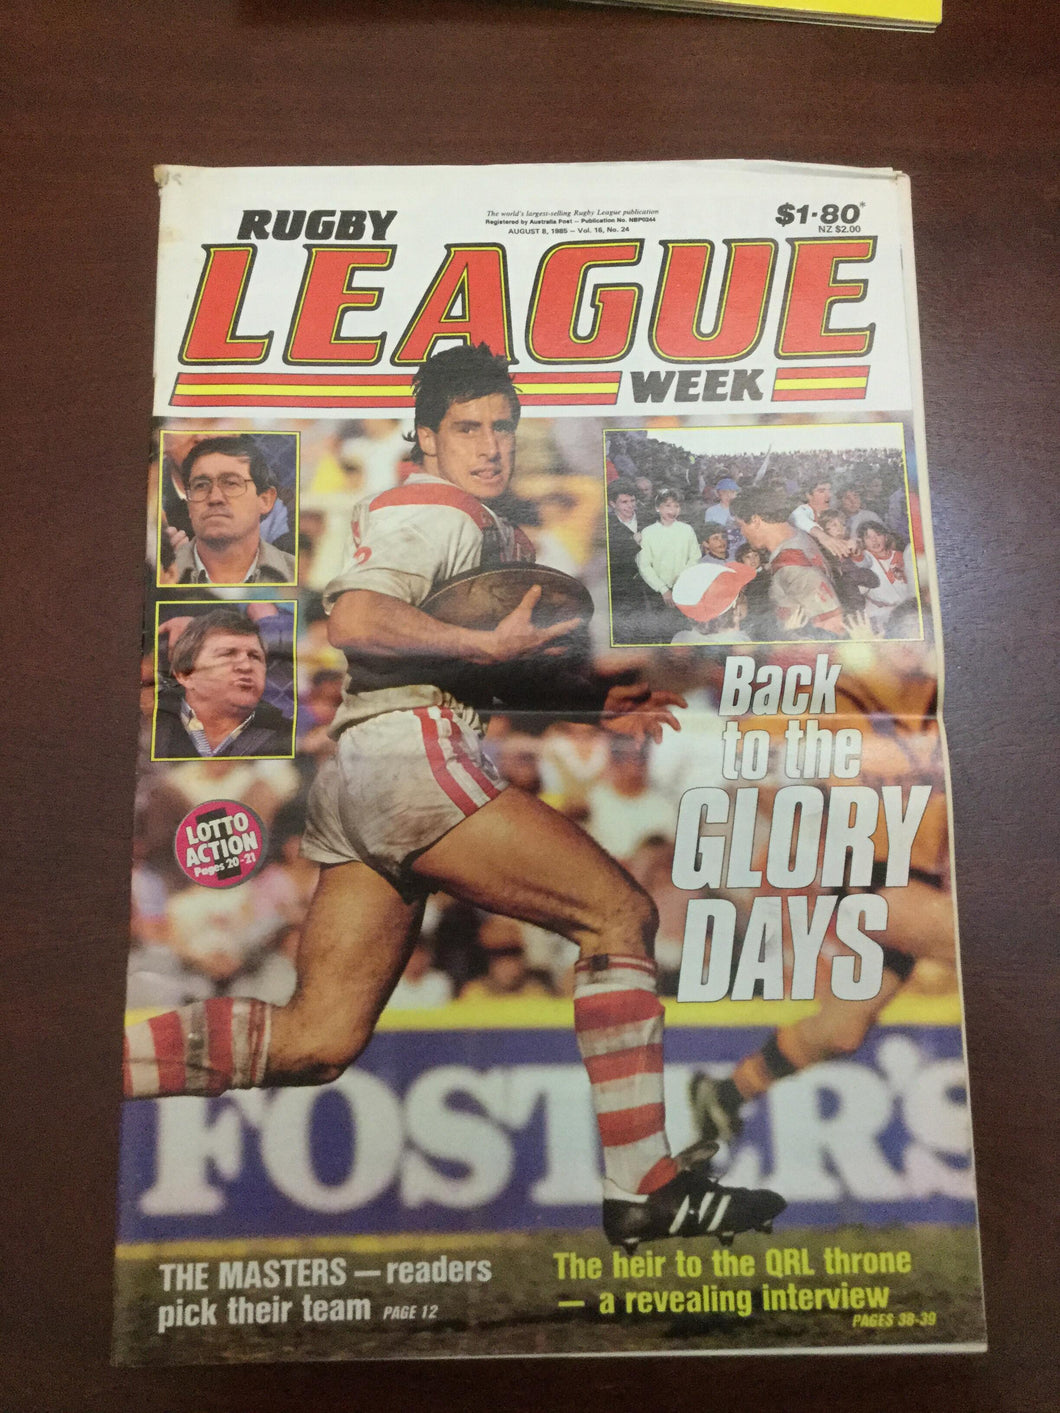 1985 Rugby League Week Magazine August 8 1985 - Vol 16 No. 24